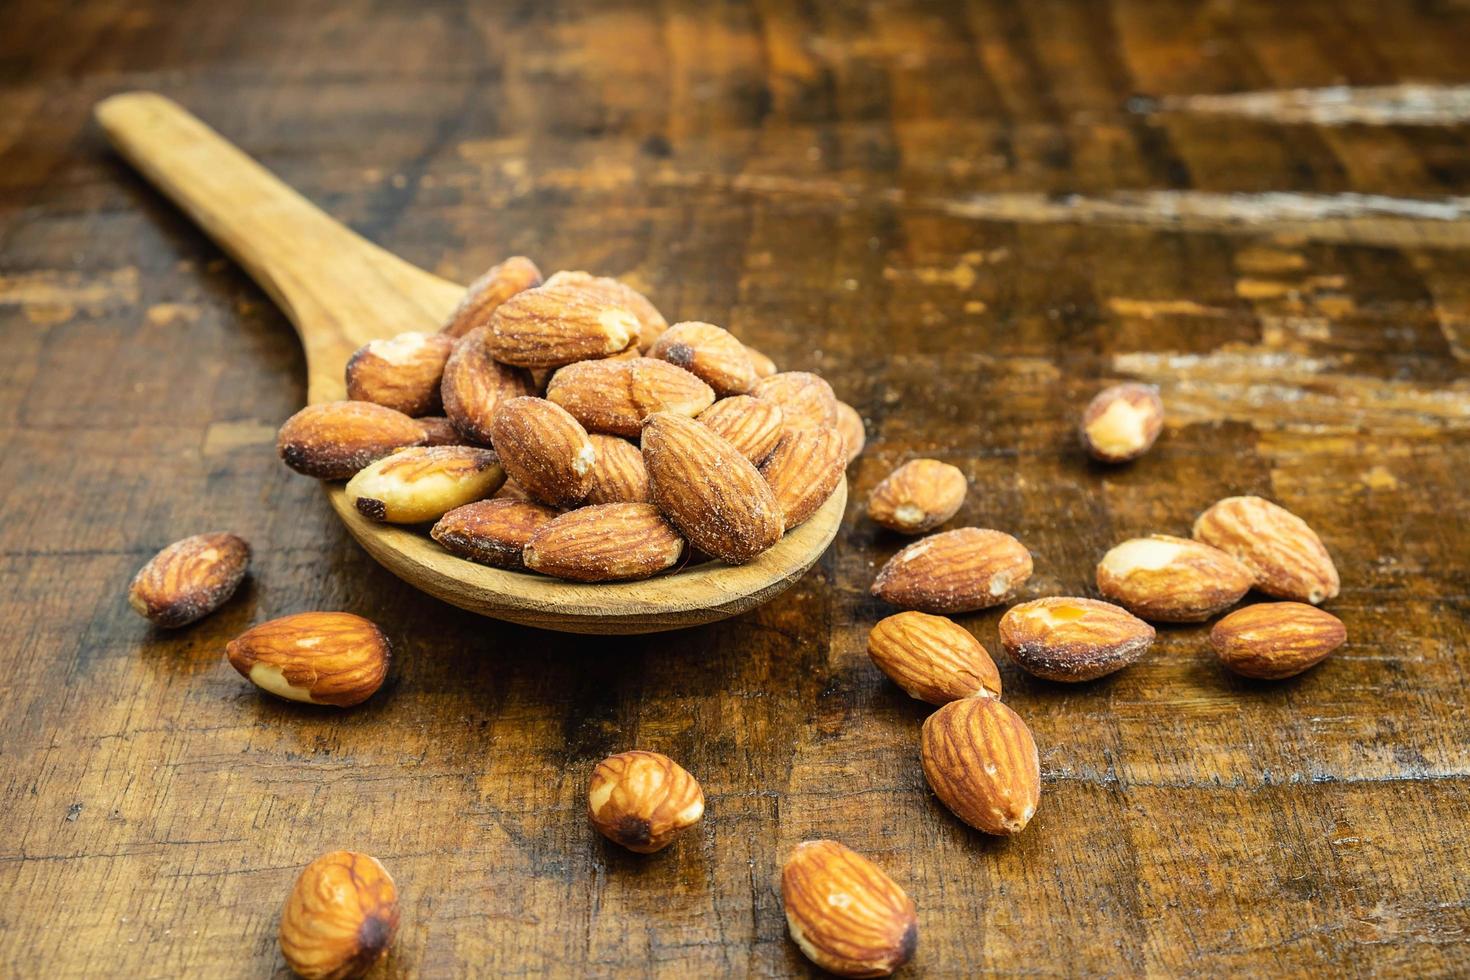 Wooden spoon with almonds on it photo